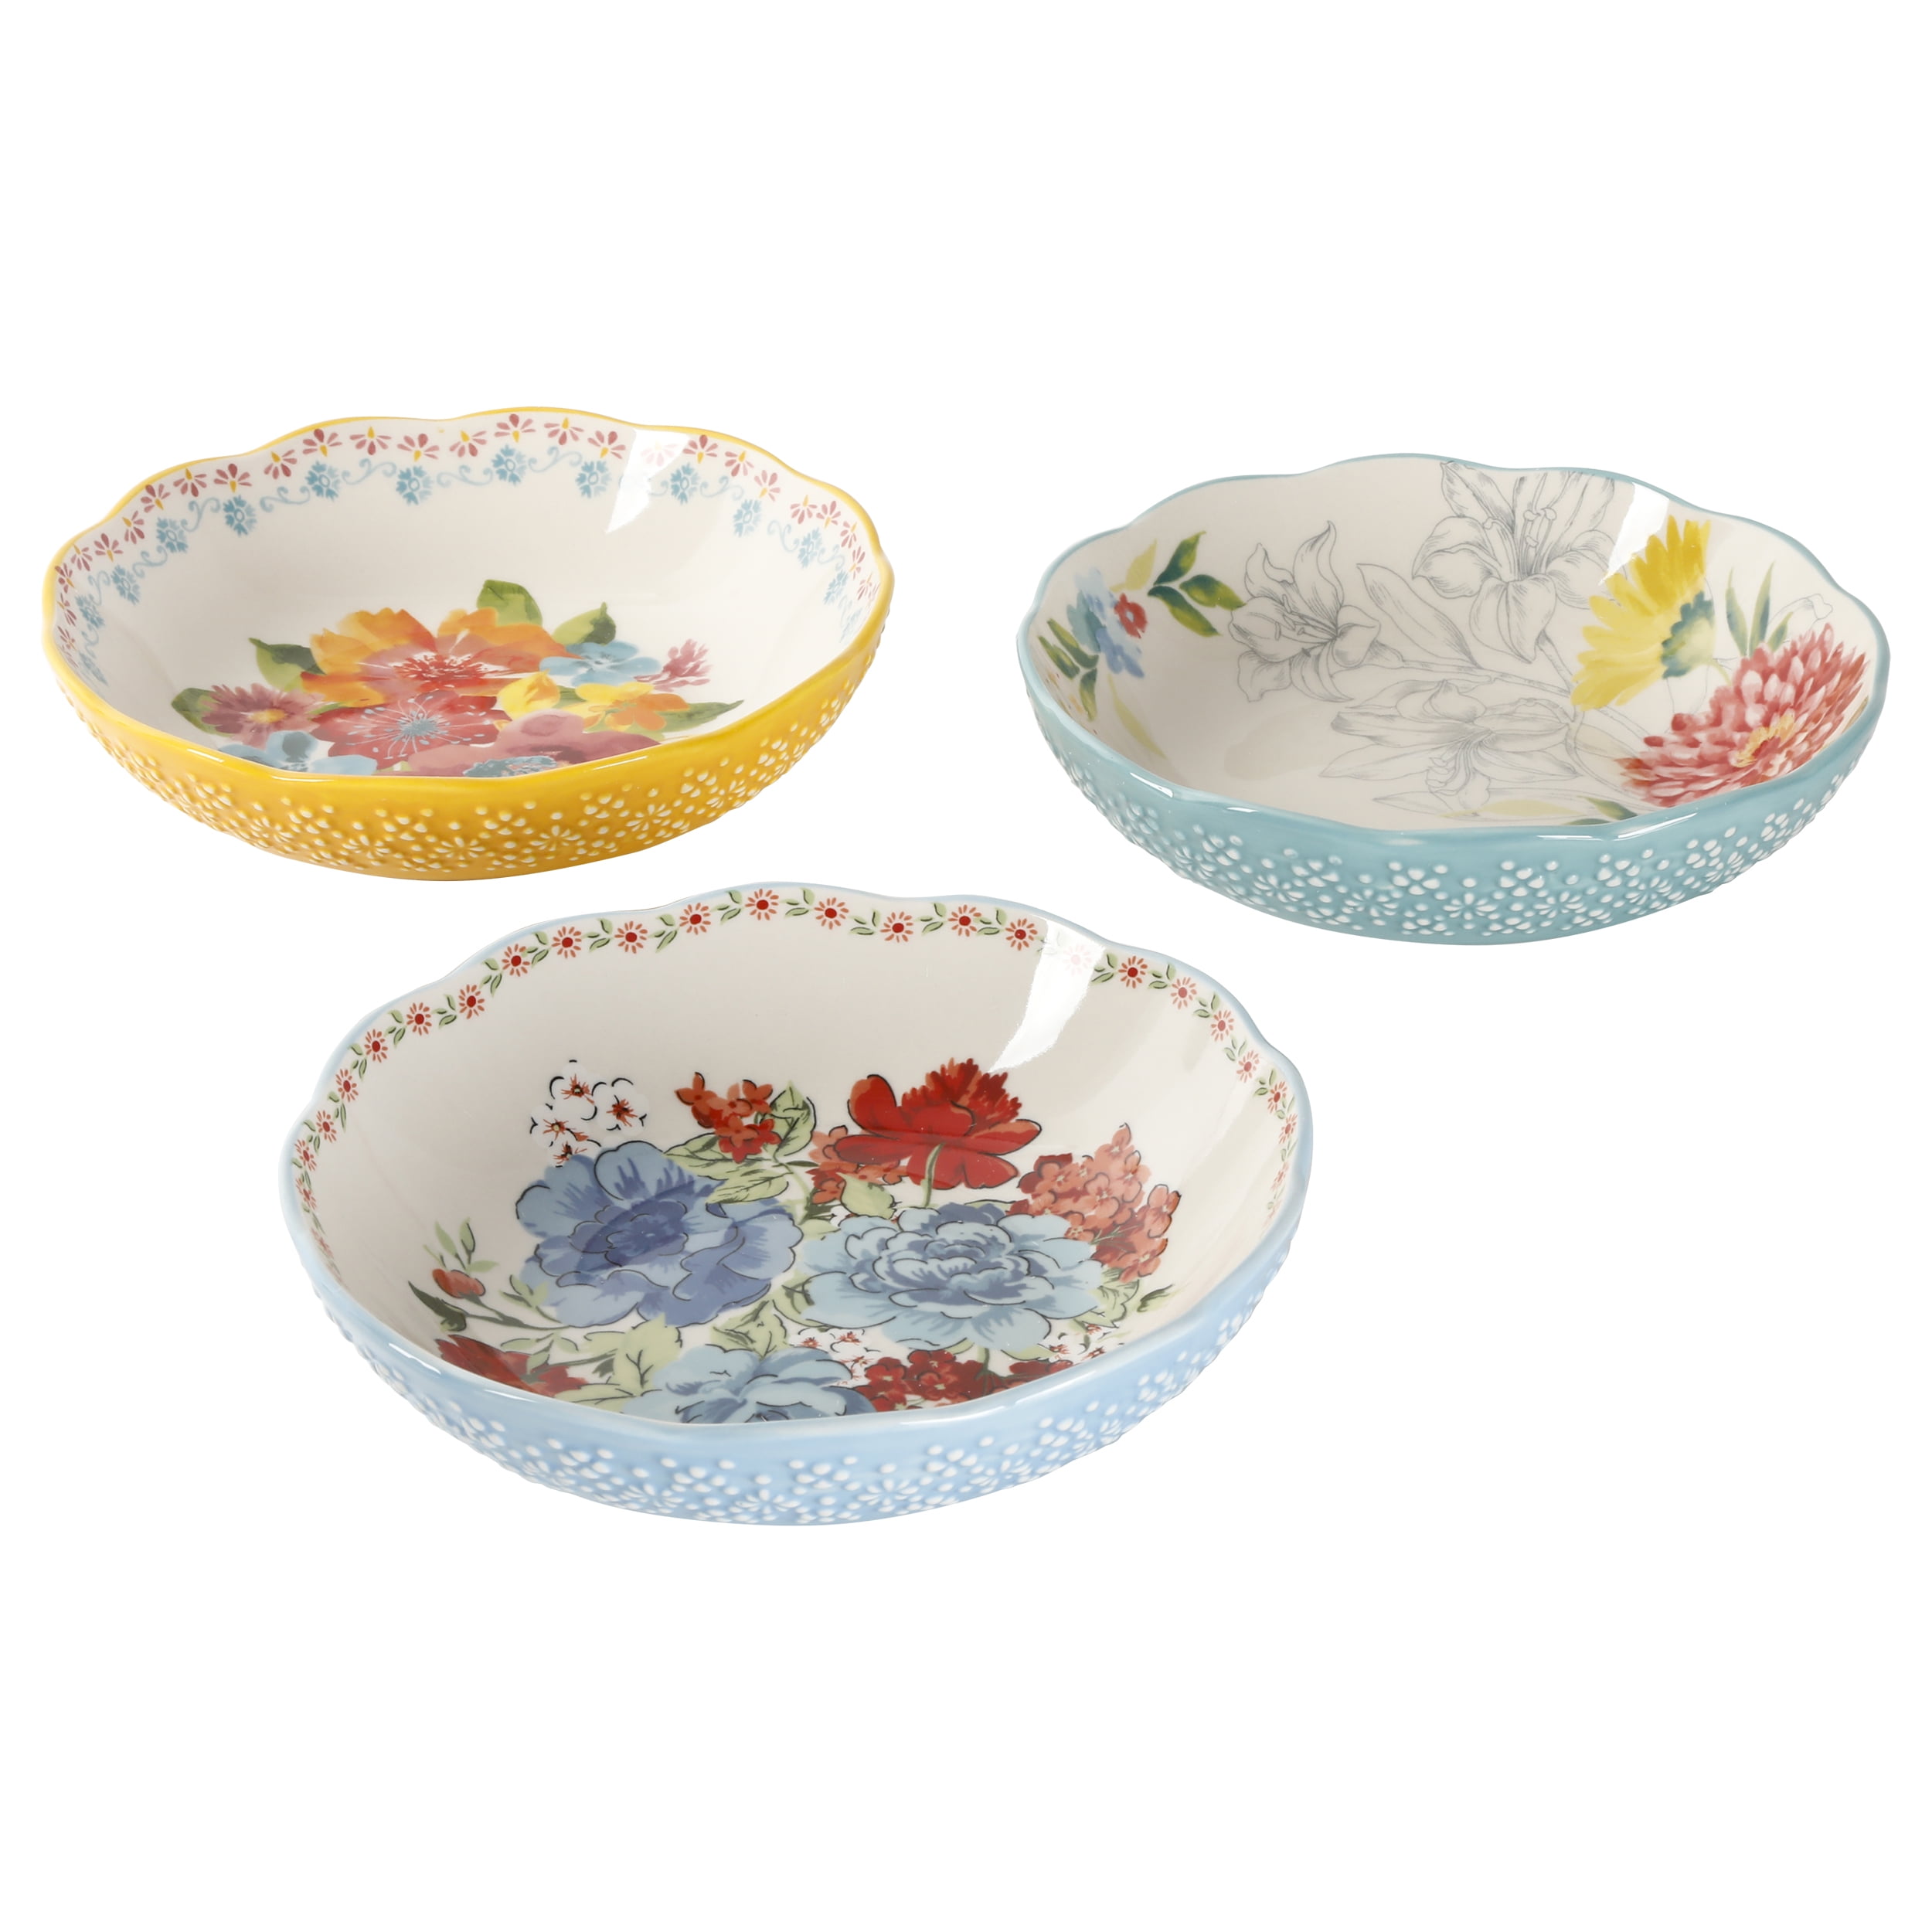 Packs 5 & 10 Quality Dual Purpose Plate/Bowl Display Stands 4 Sizes 3 Colours 